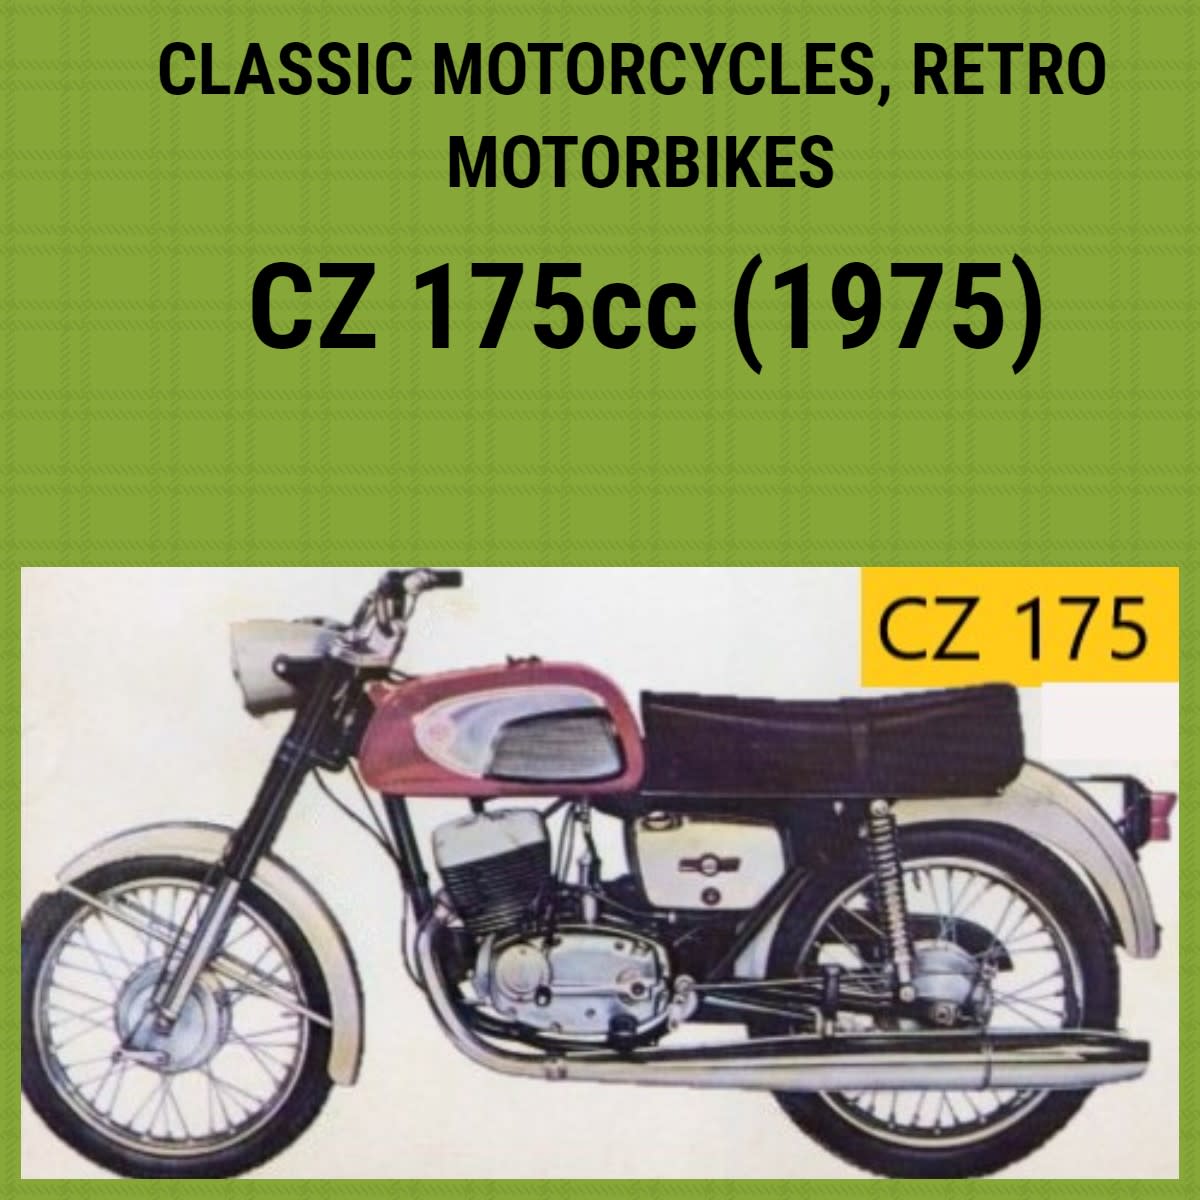 All About the Jawa-CZ 175 (My First Motorcycle in 1975!)